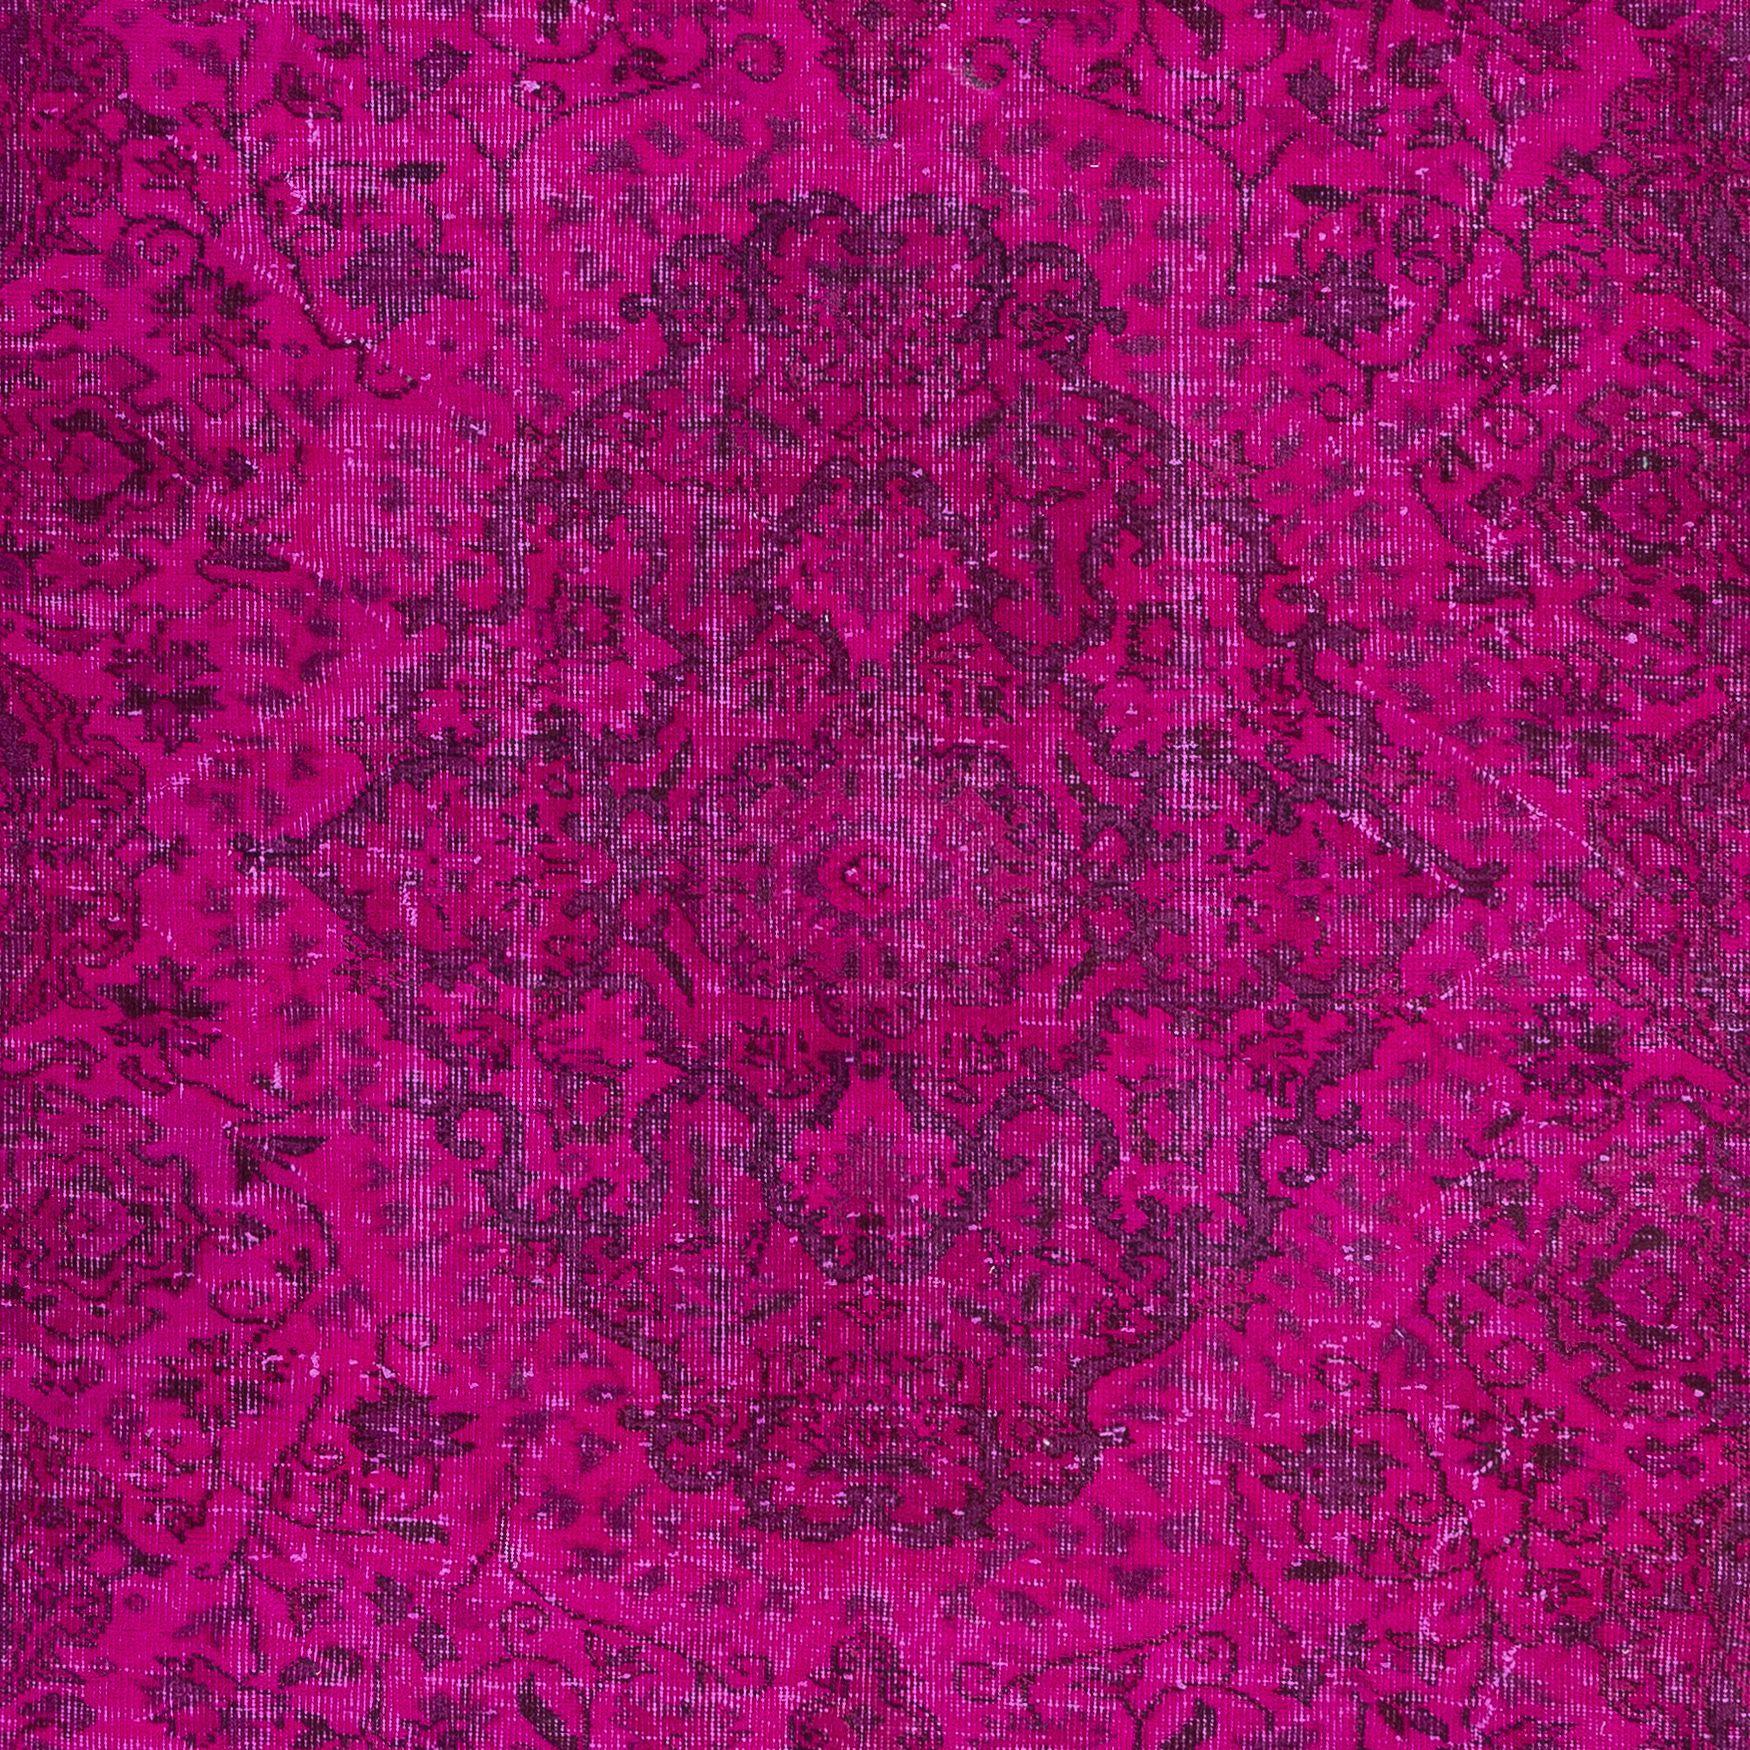 Hand-Knotted 5.6x8.7 Ft Handmade Turkish Wool Area Rug in Hot Pink, Great for Modern Interior For Sale